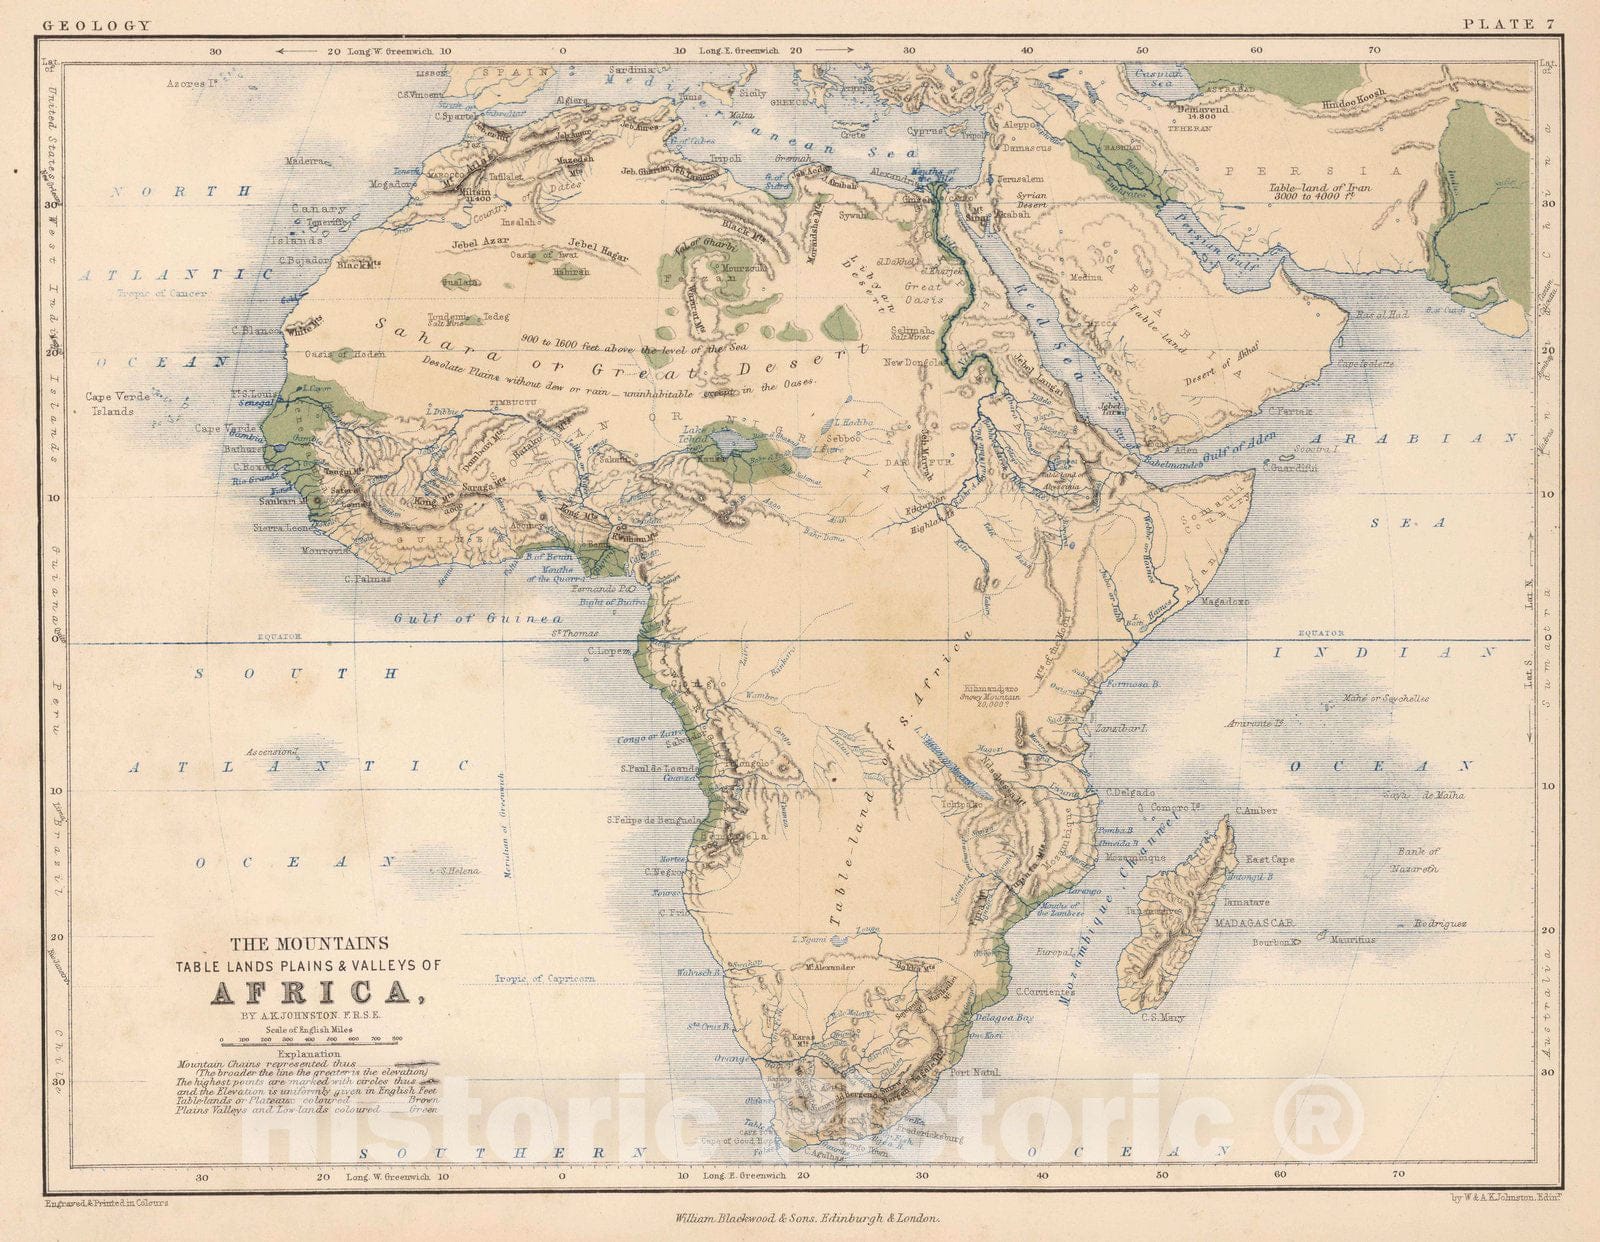 Historic Map : 1852 Mountains, Table Lands, Plains & Valleys of Africa - Vintage Wall Art